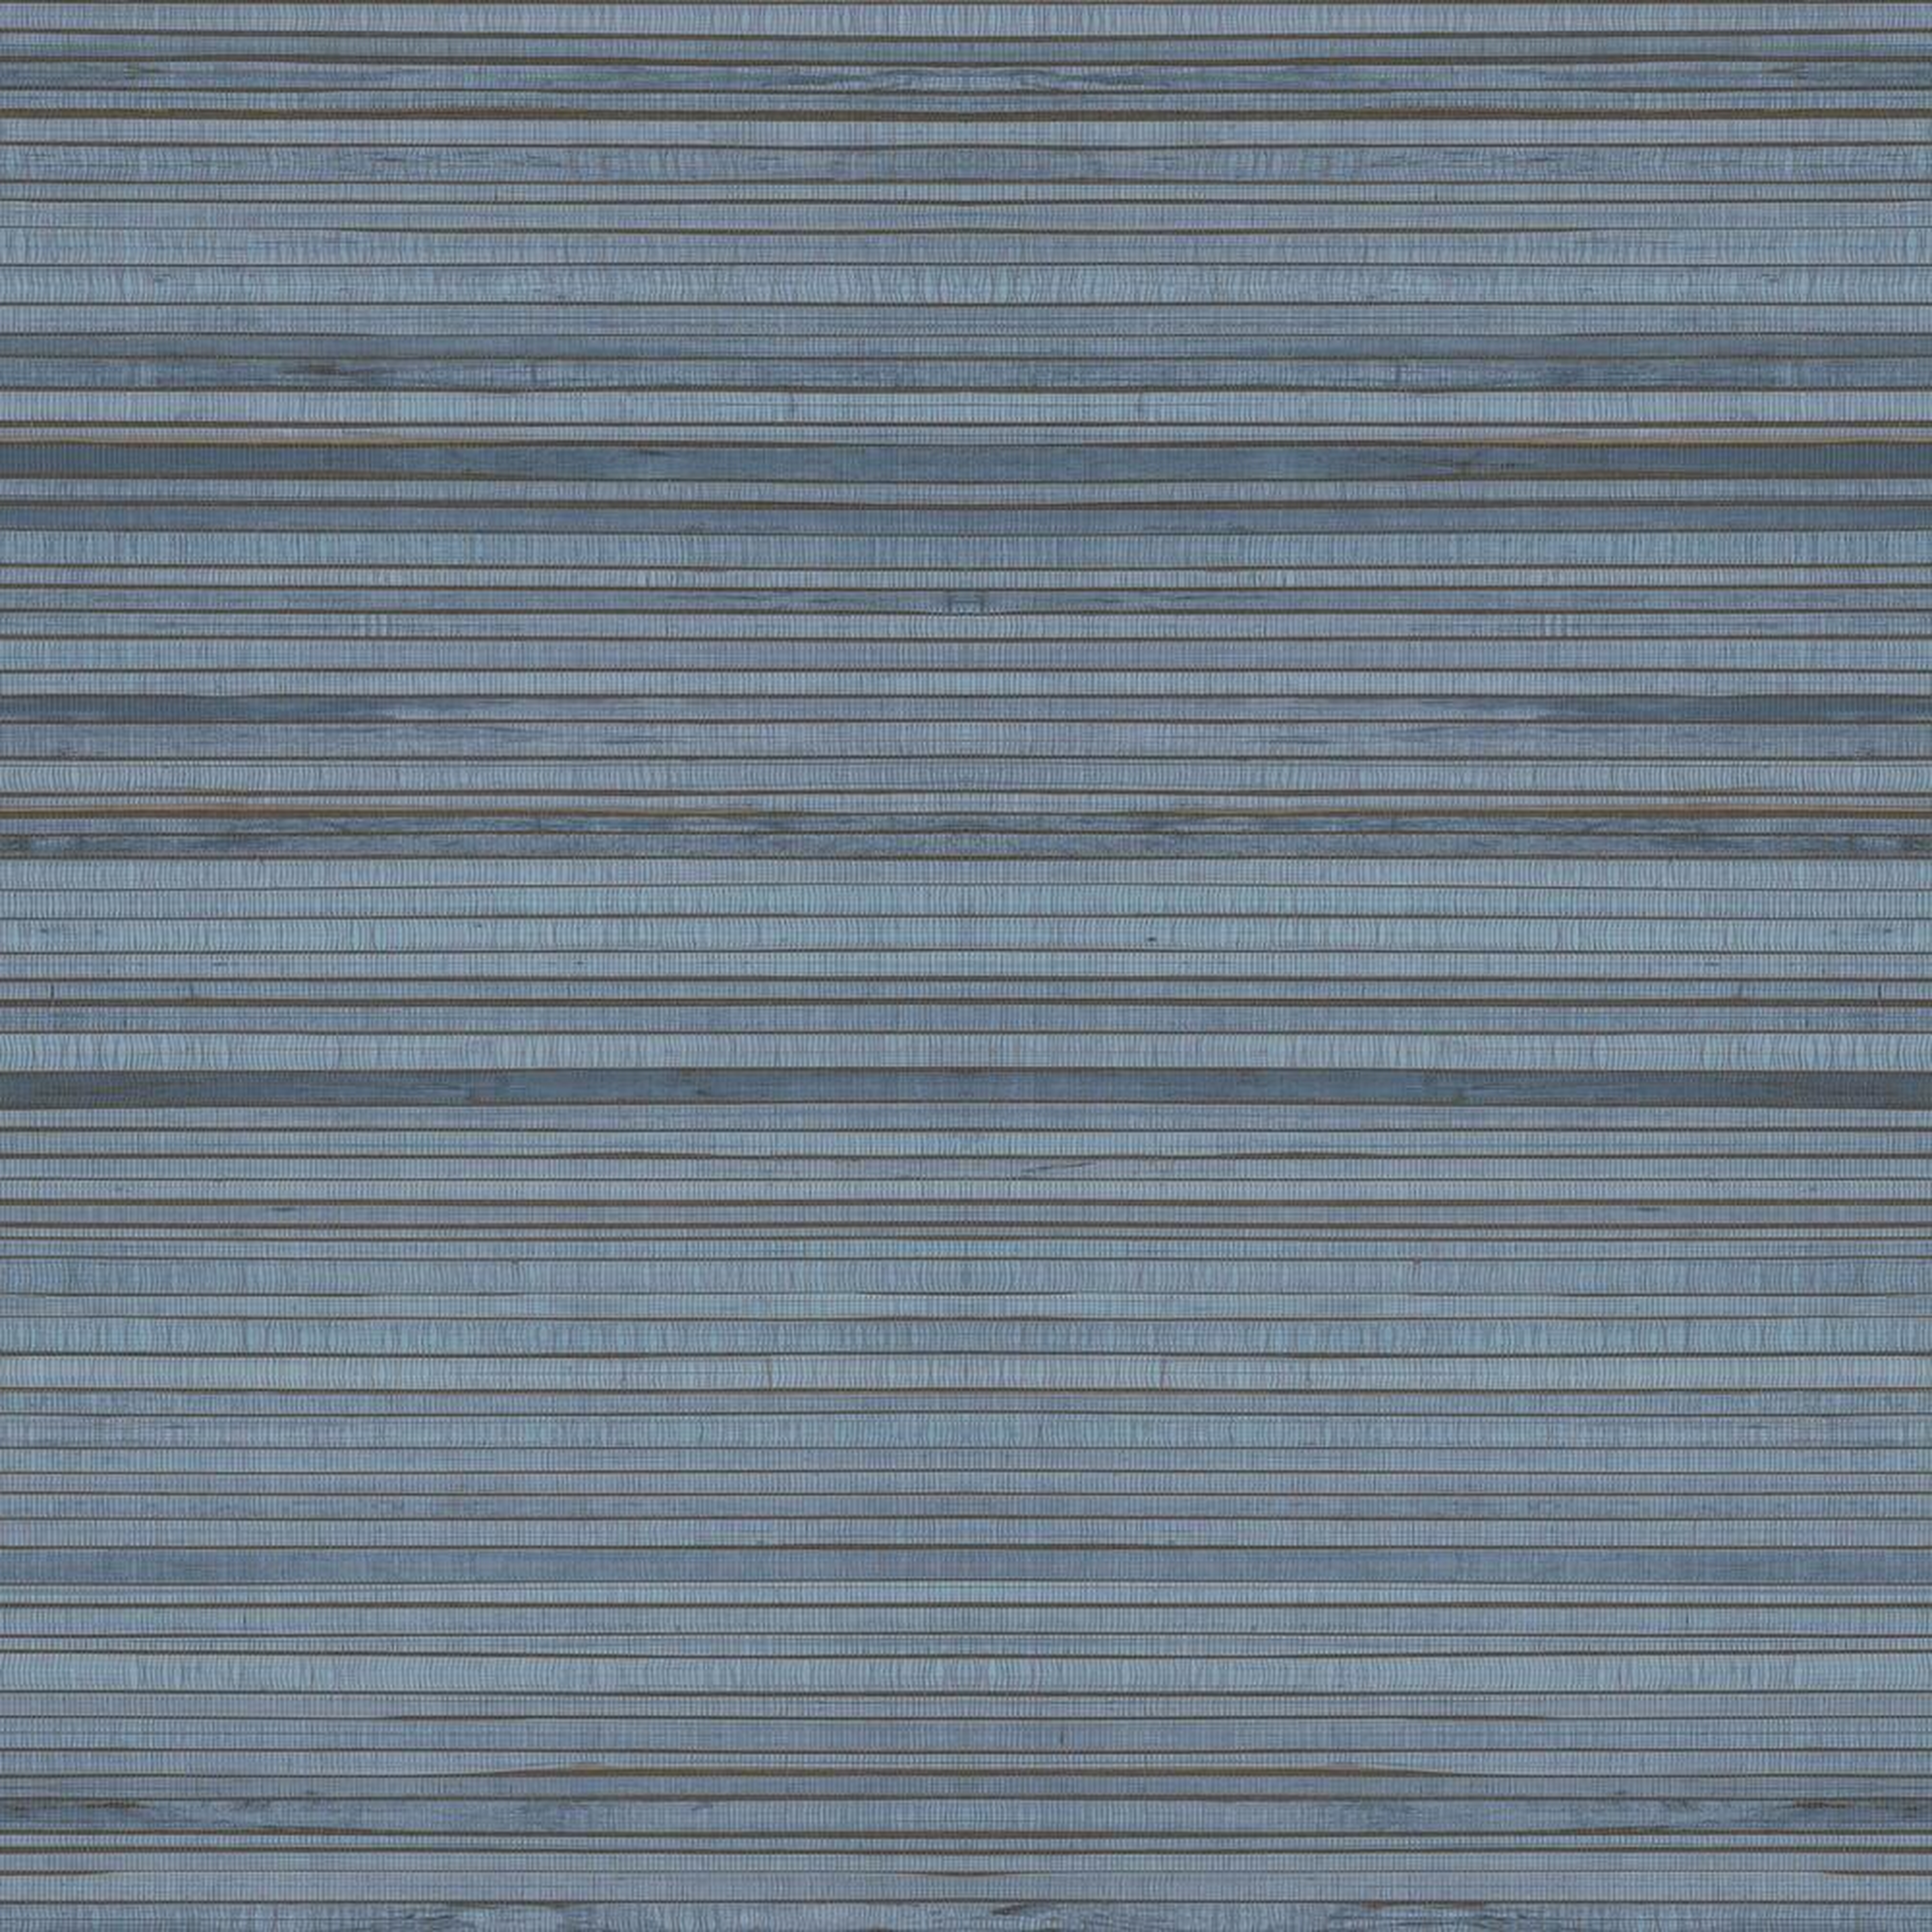 Faux Bamboo Grasscloth Peel and Stick Wallpaper - York Wallcoverings